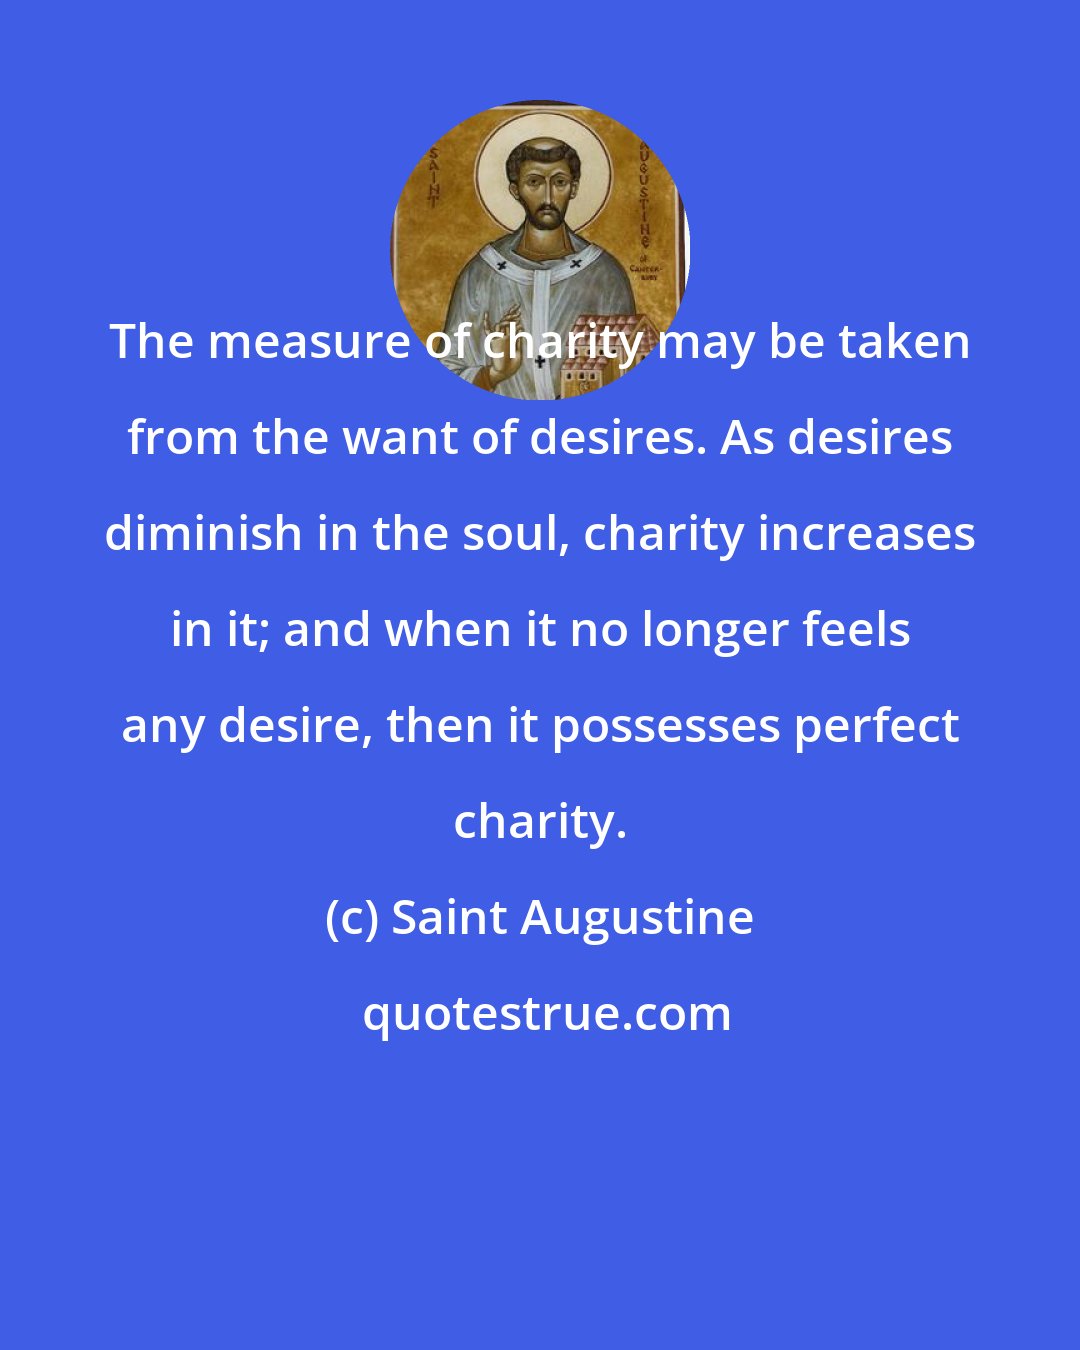 Saint Augustine: The measure of charity may be taken from the want of desires. As desires diminish in the soul, charity increases in it; and when it no longer feels any desire, then it possesses perfect charity.